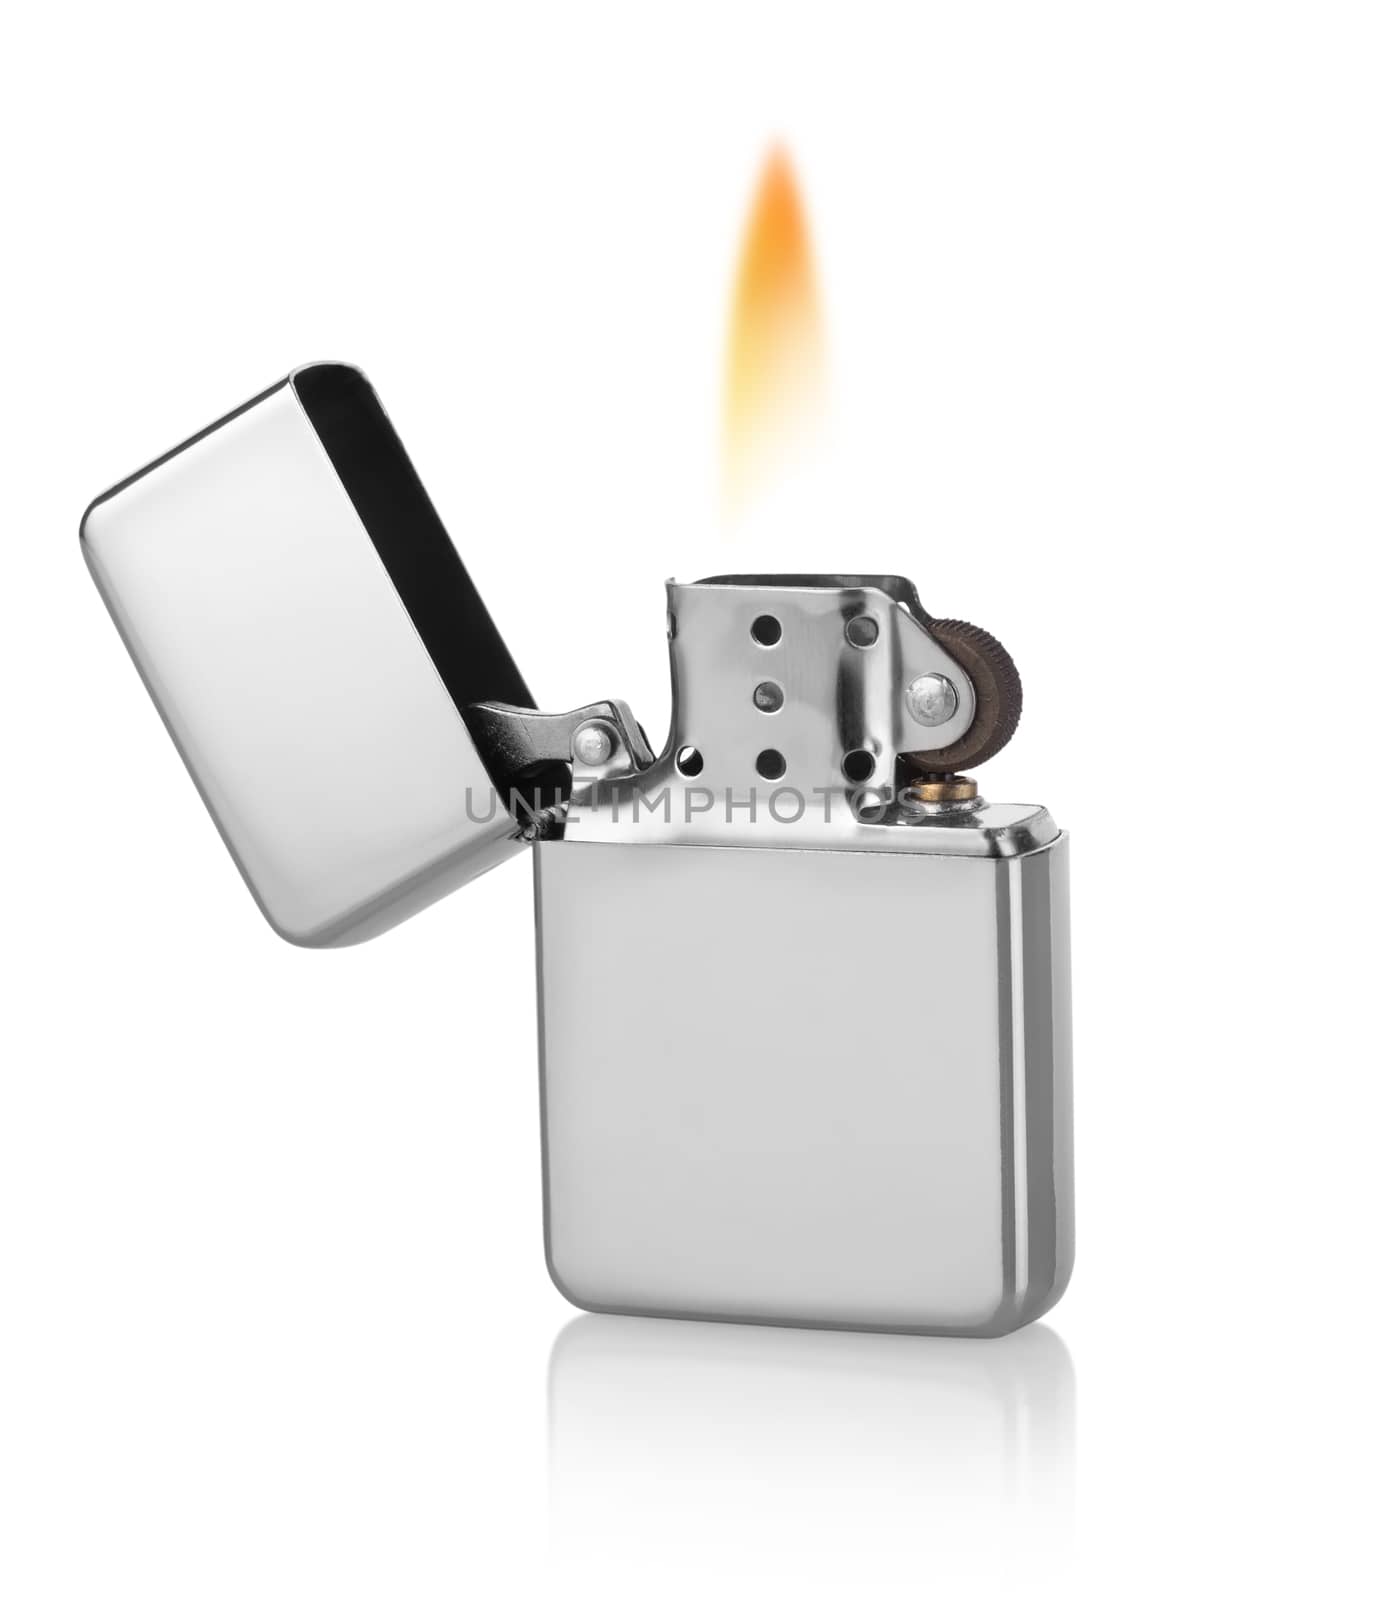 Metal lighter isolated on a white background